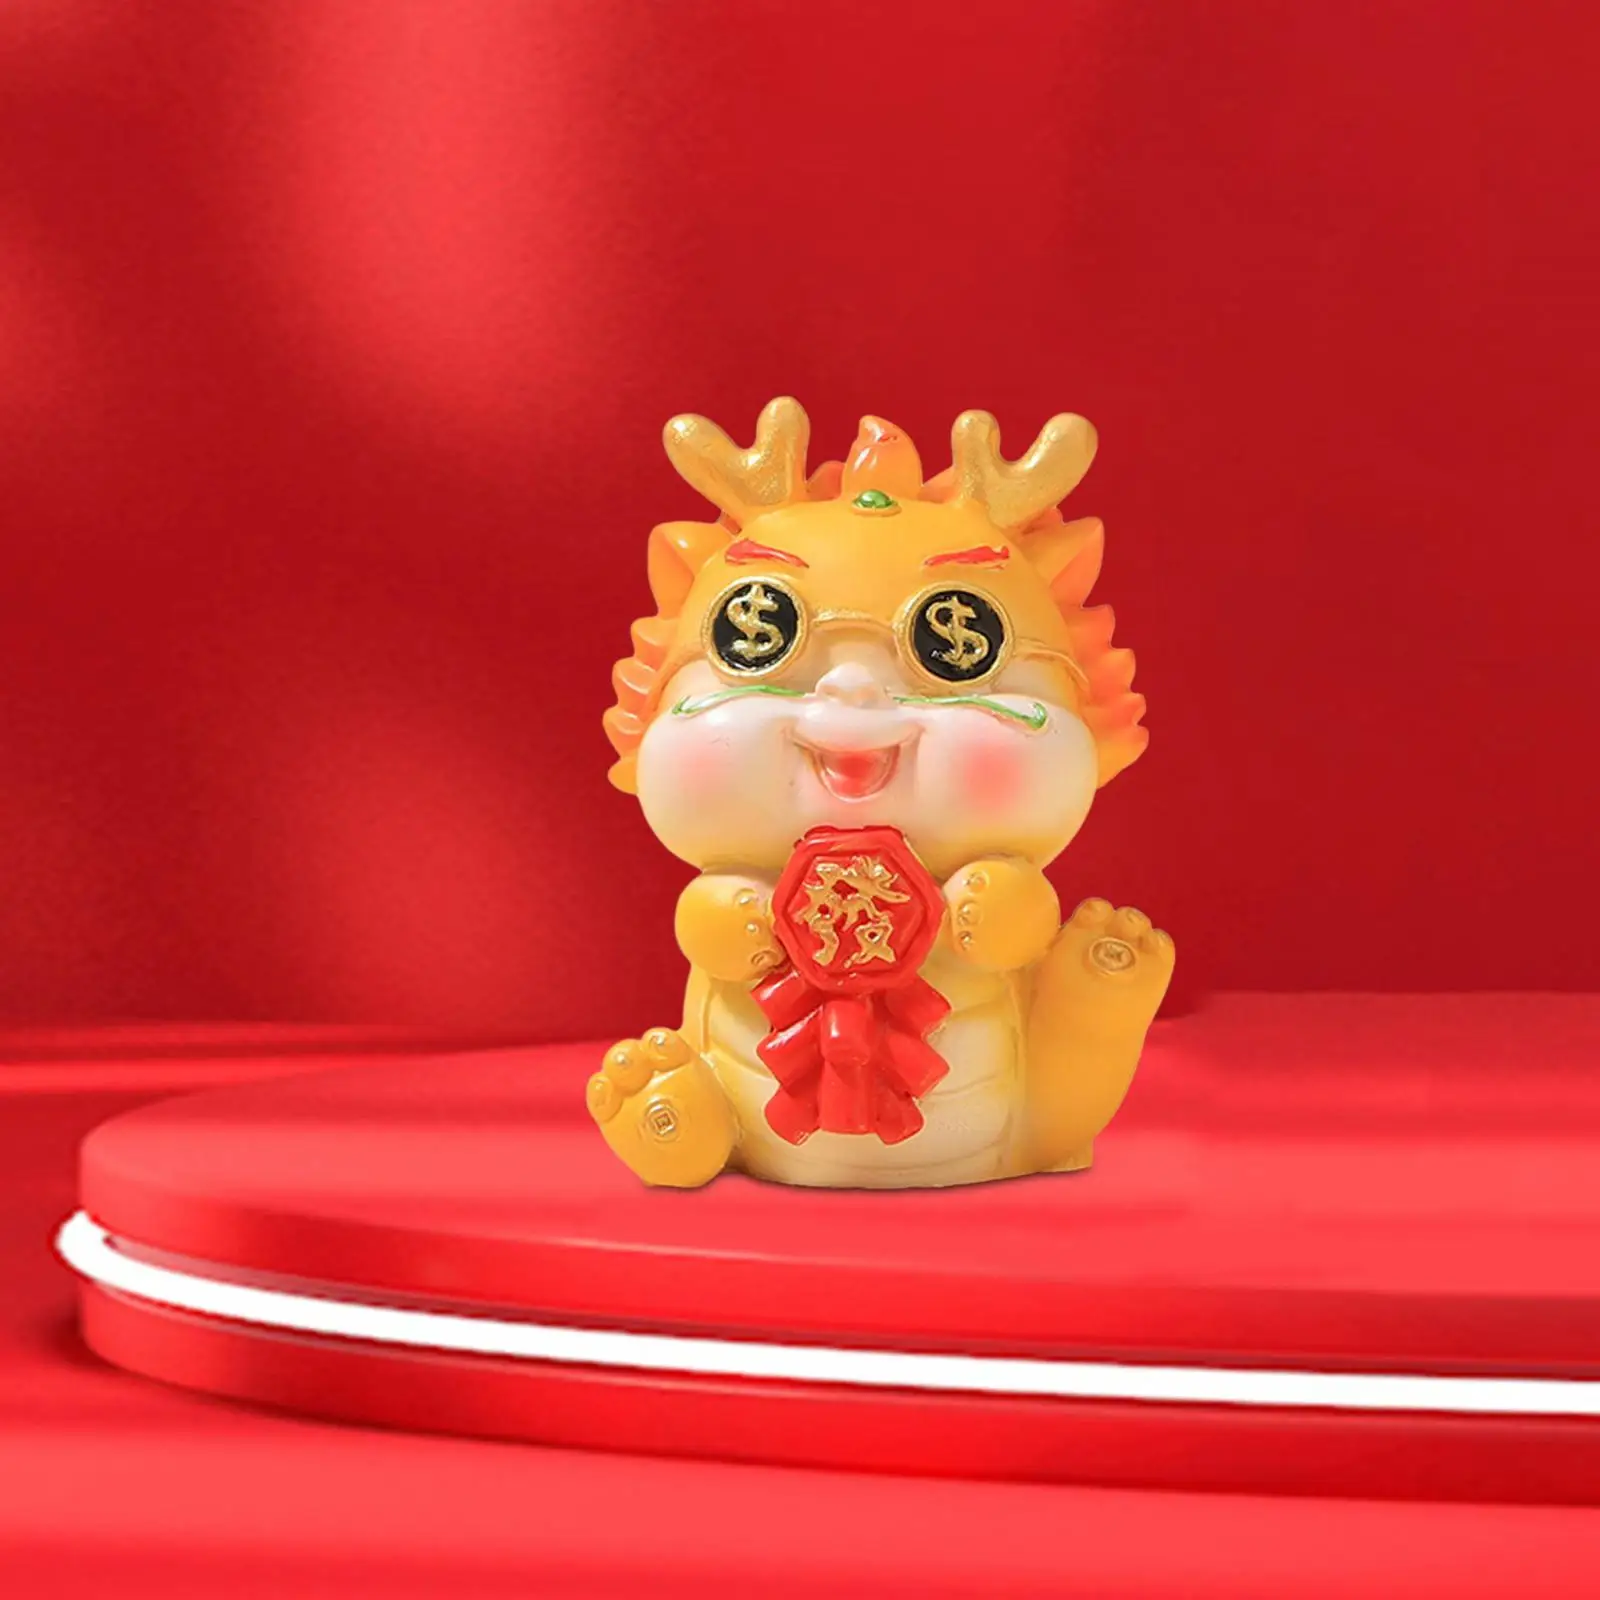 Resin Chinese Dragon Statue Cute Table Centerpiece Chinese New Year Dragon Figurine for Office Shelf Home Living Room Decor